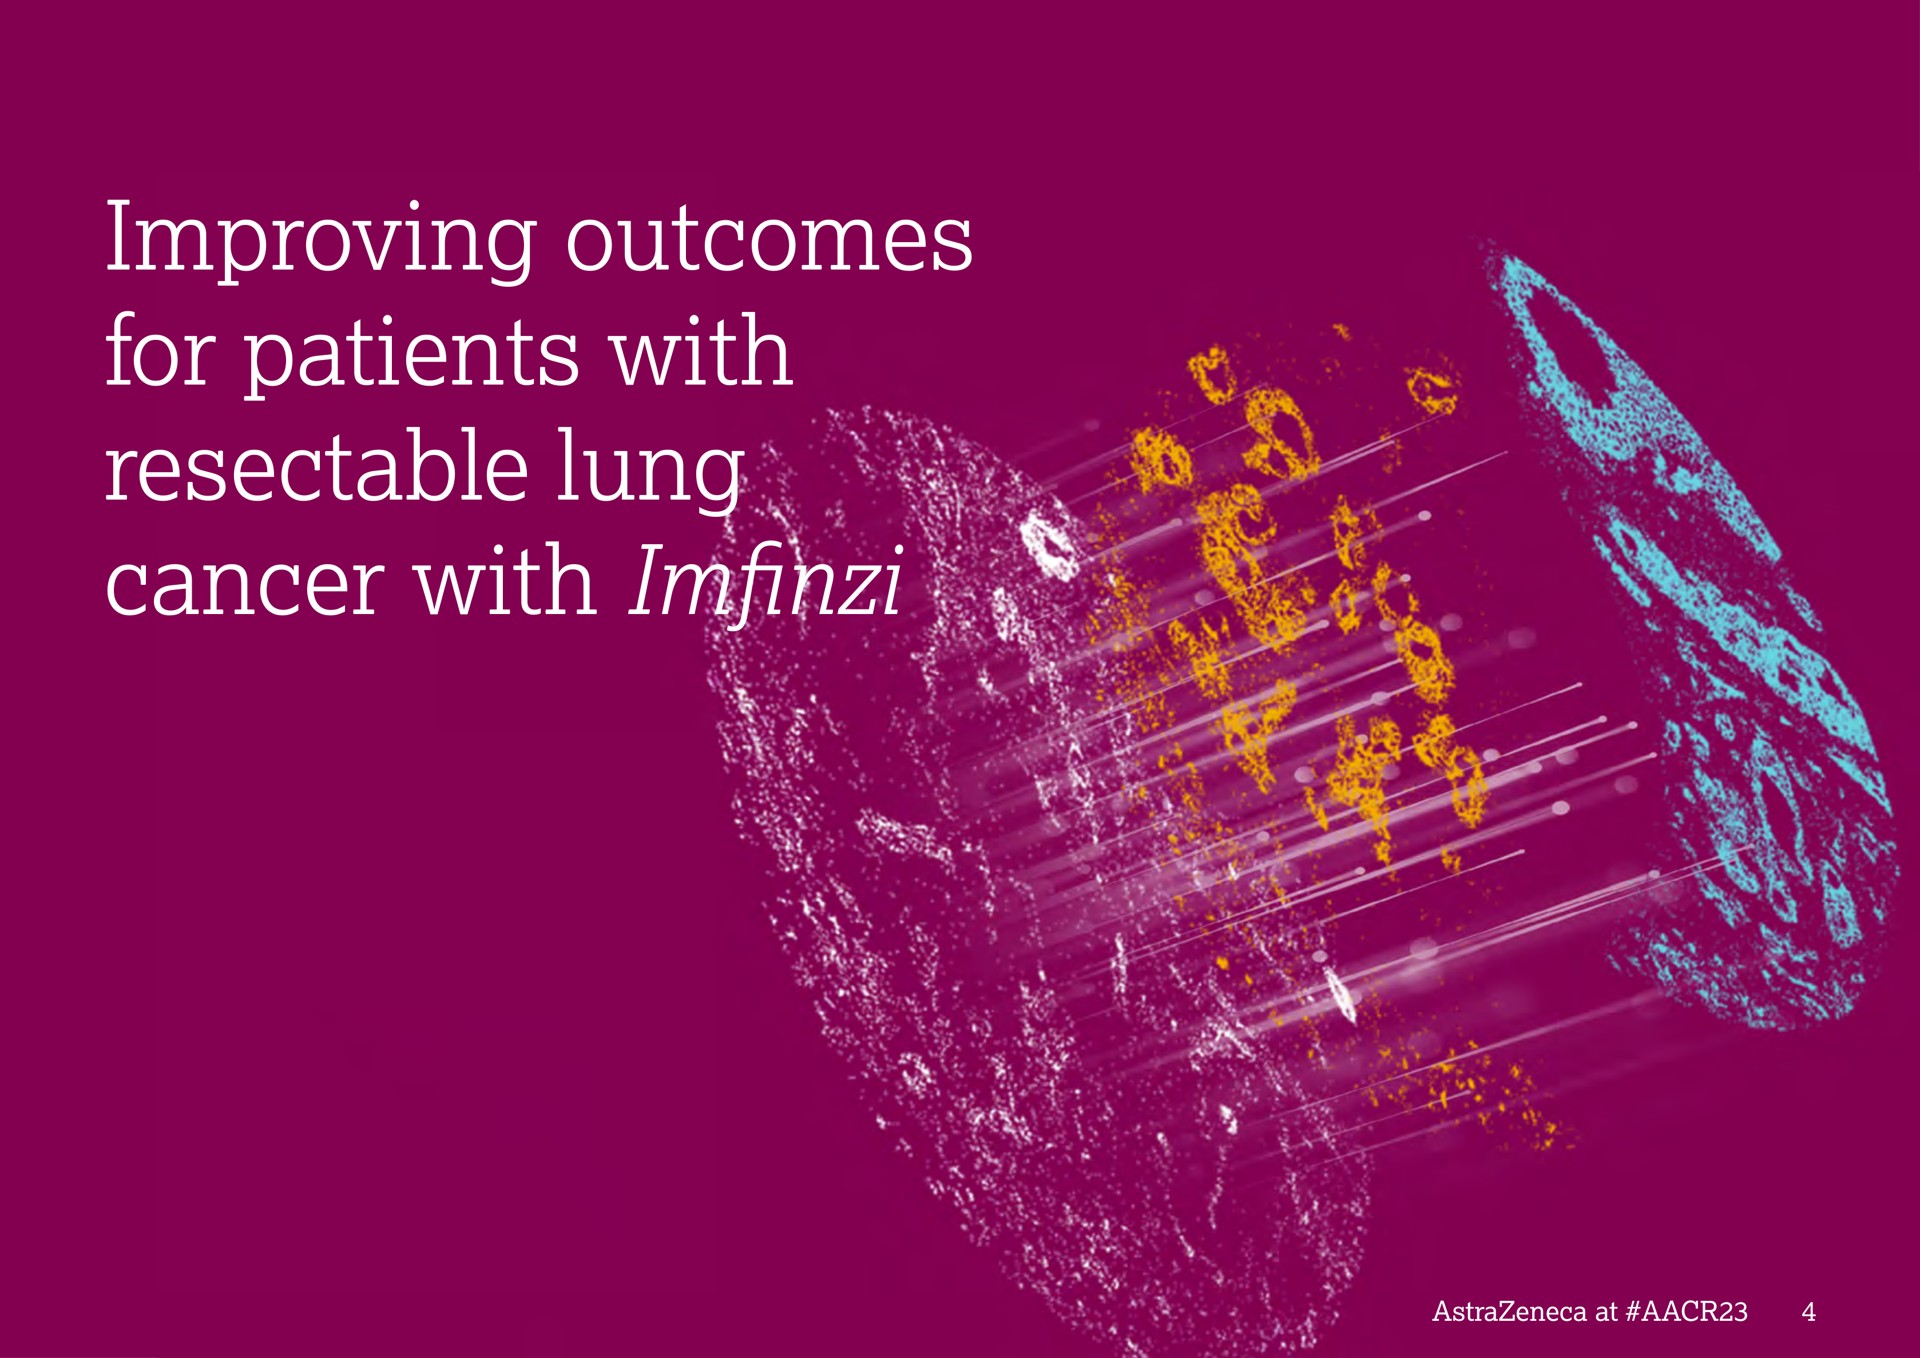 improving outcomes for patients with lung cancer with | AstraZeneca